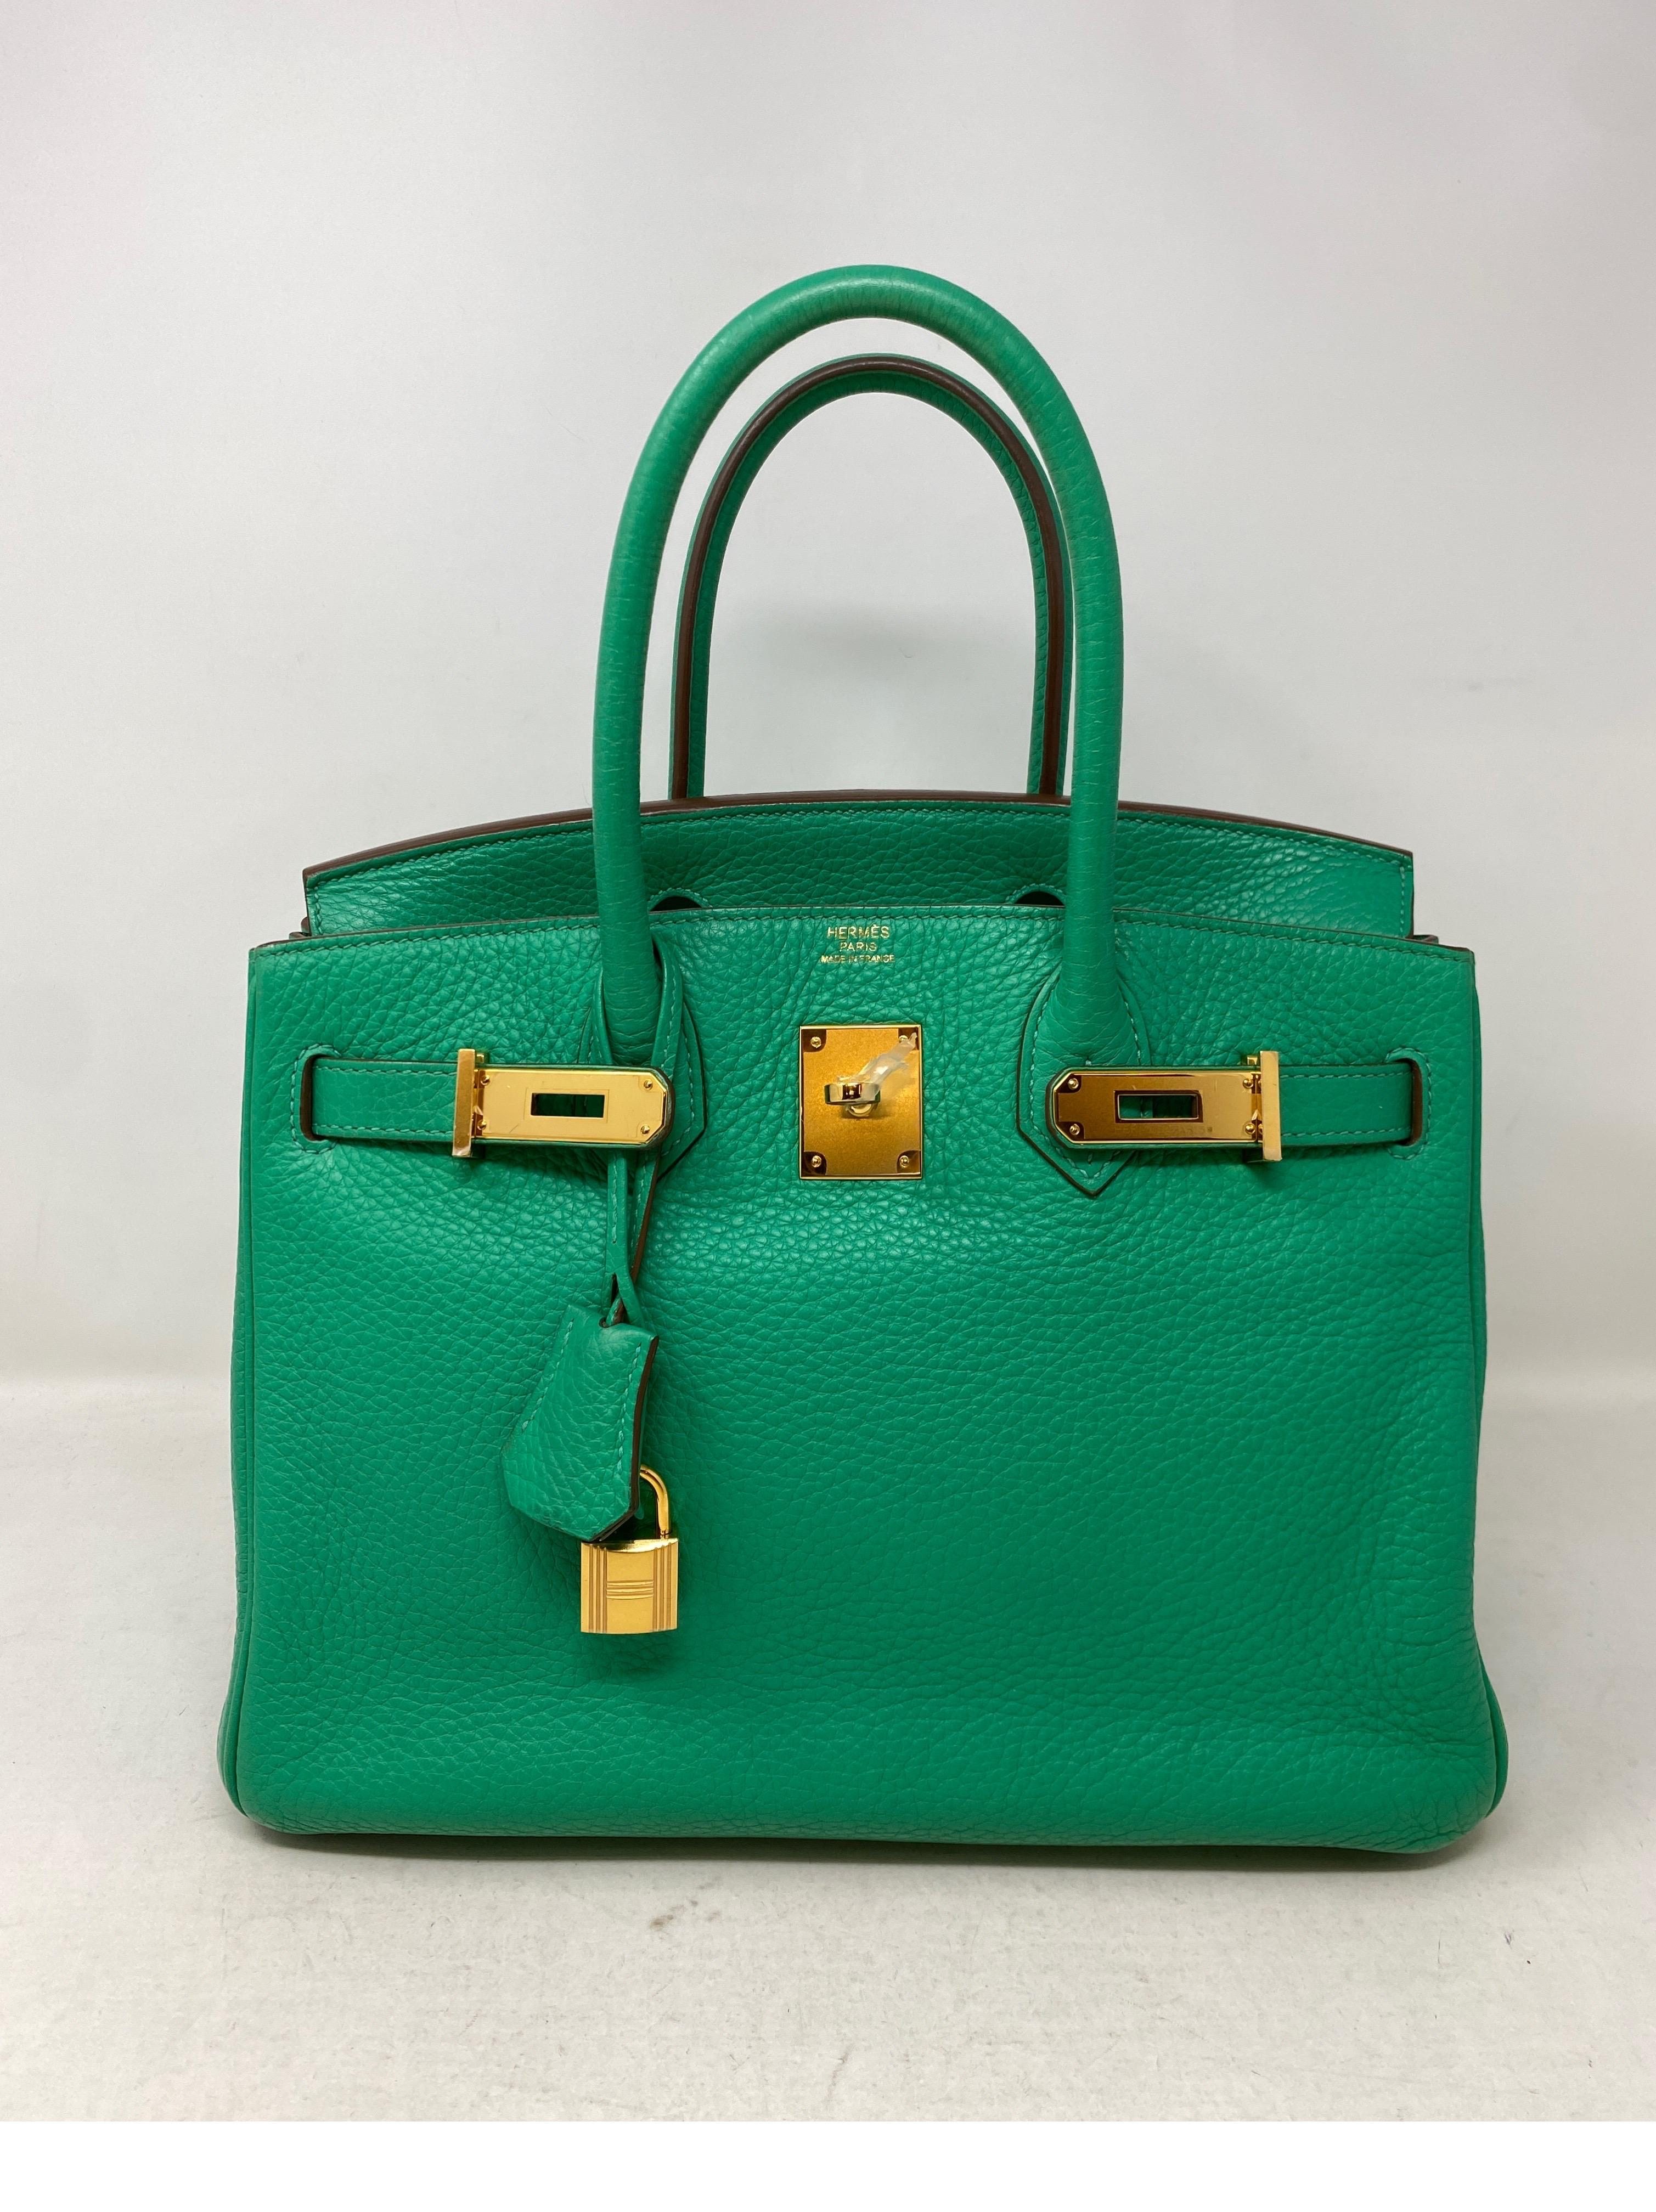 Hermes Menthe Birkin 30 Bag. Minty green color with gold hardware. Clemence leather. Interior clean. Exterior excellent condition. Plastic is still on hardware. Includes clochette, lock, keys, and dust bag. Guaranteed authentic. 